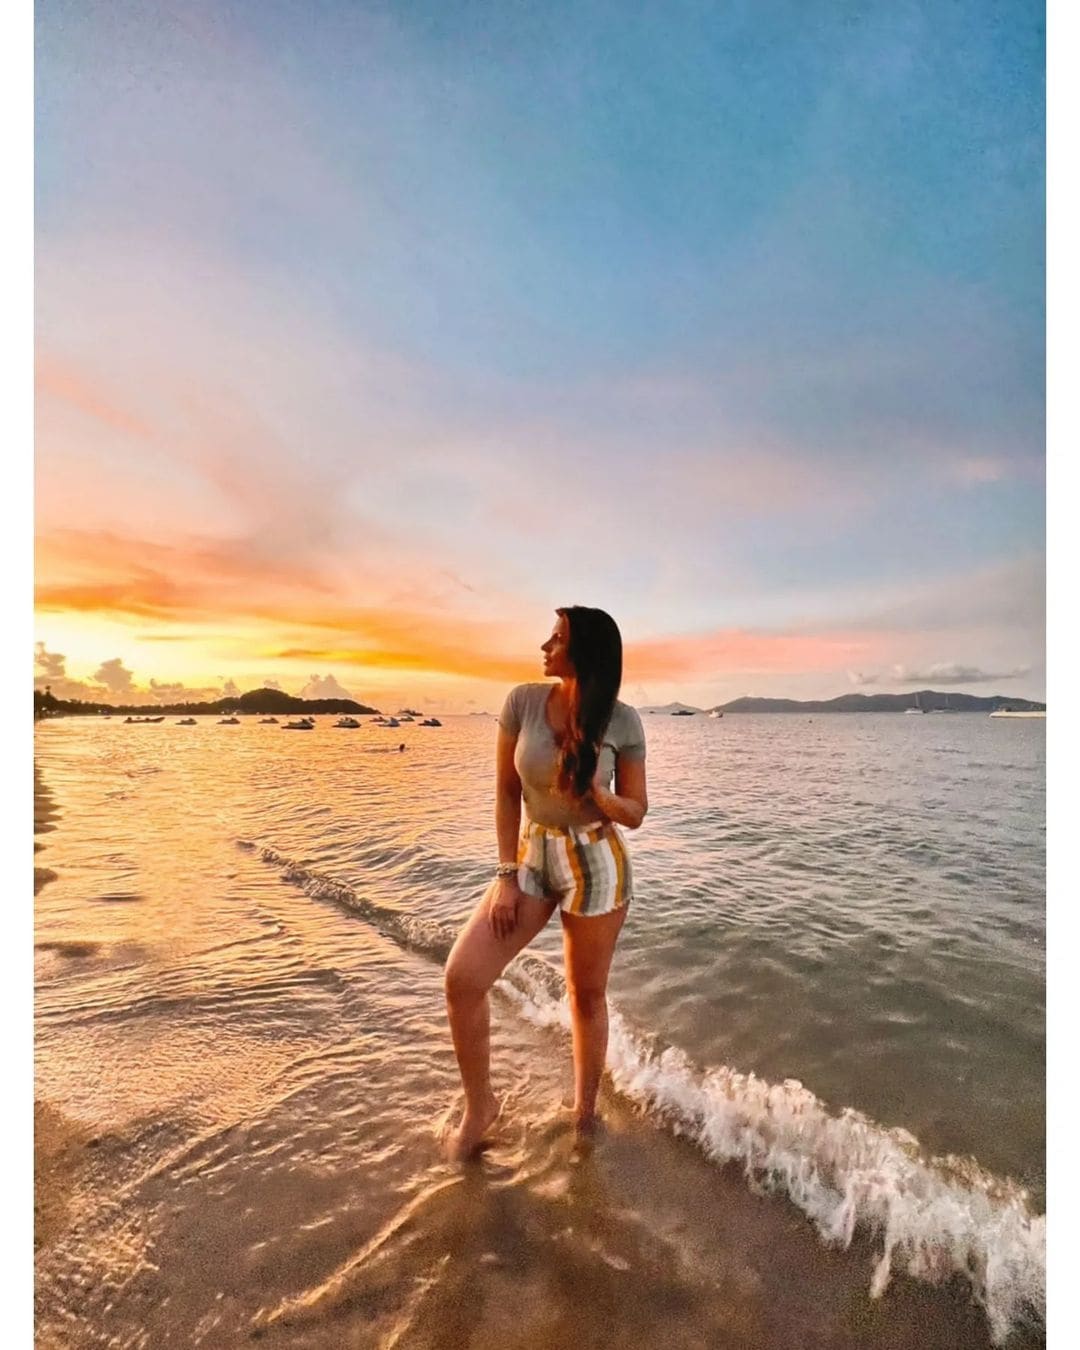 Shama Sikander gave her followers a quick sneak peek of her romantic vacation in a series of sizzling photographs from Koh Samui, Thailand